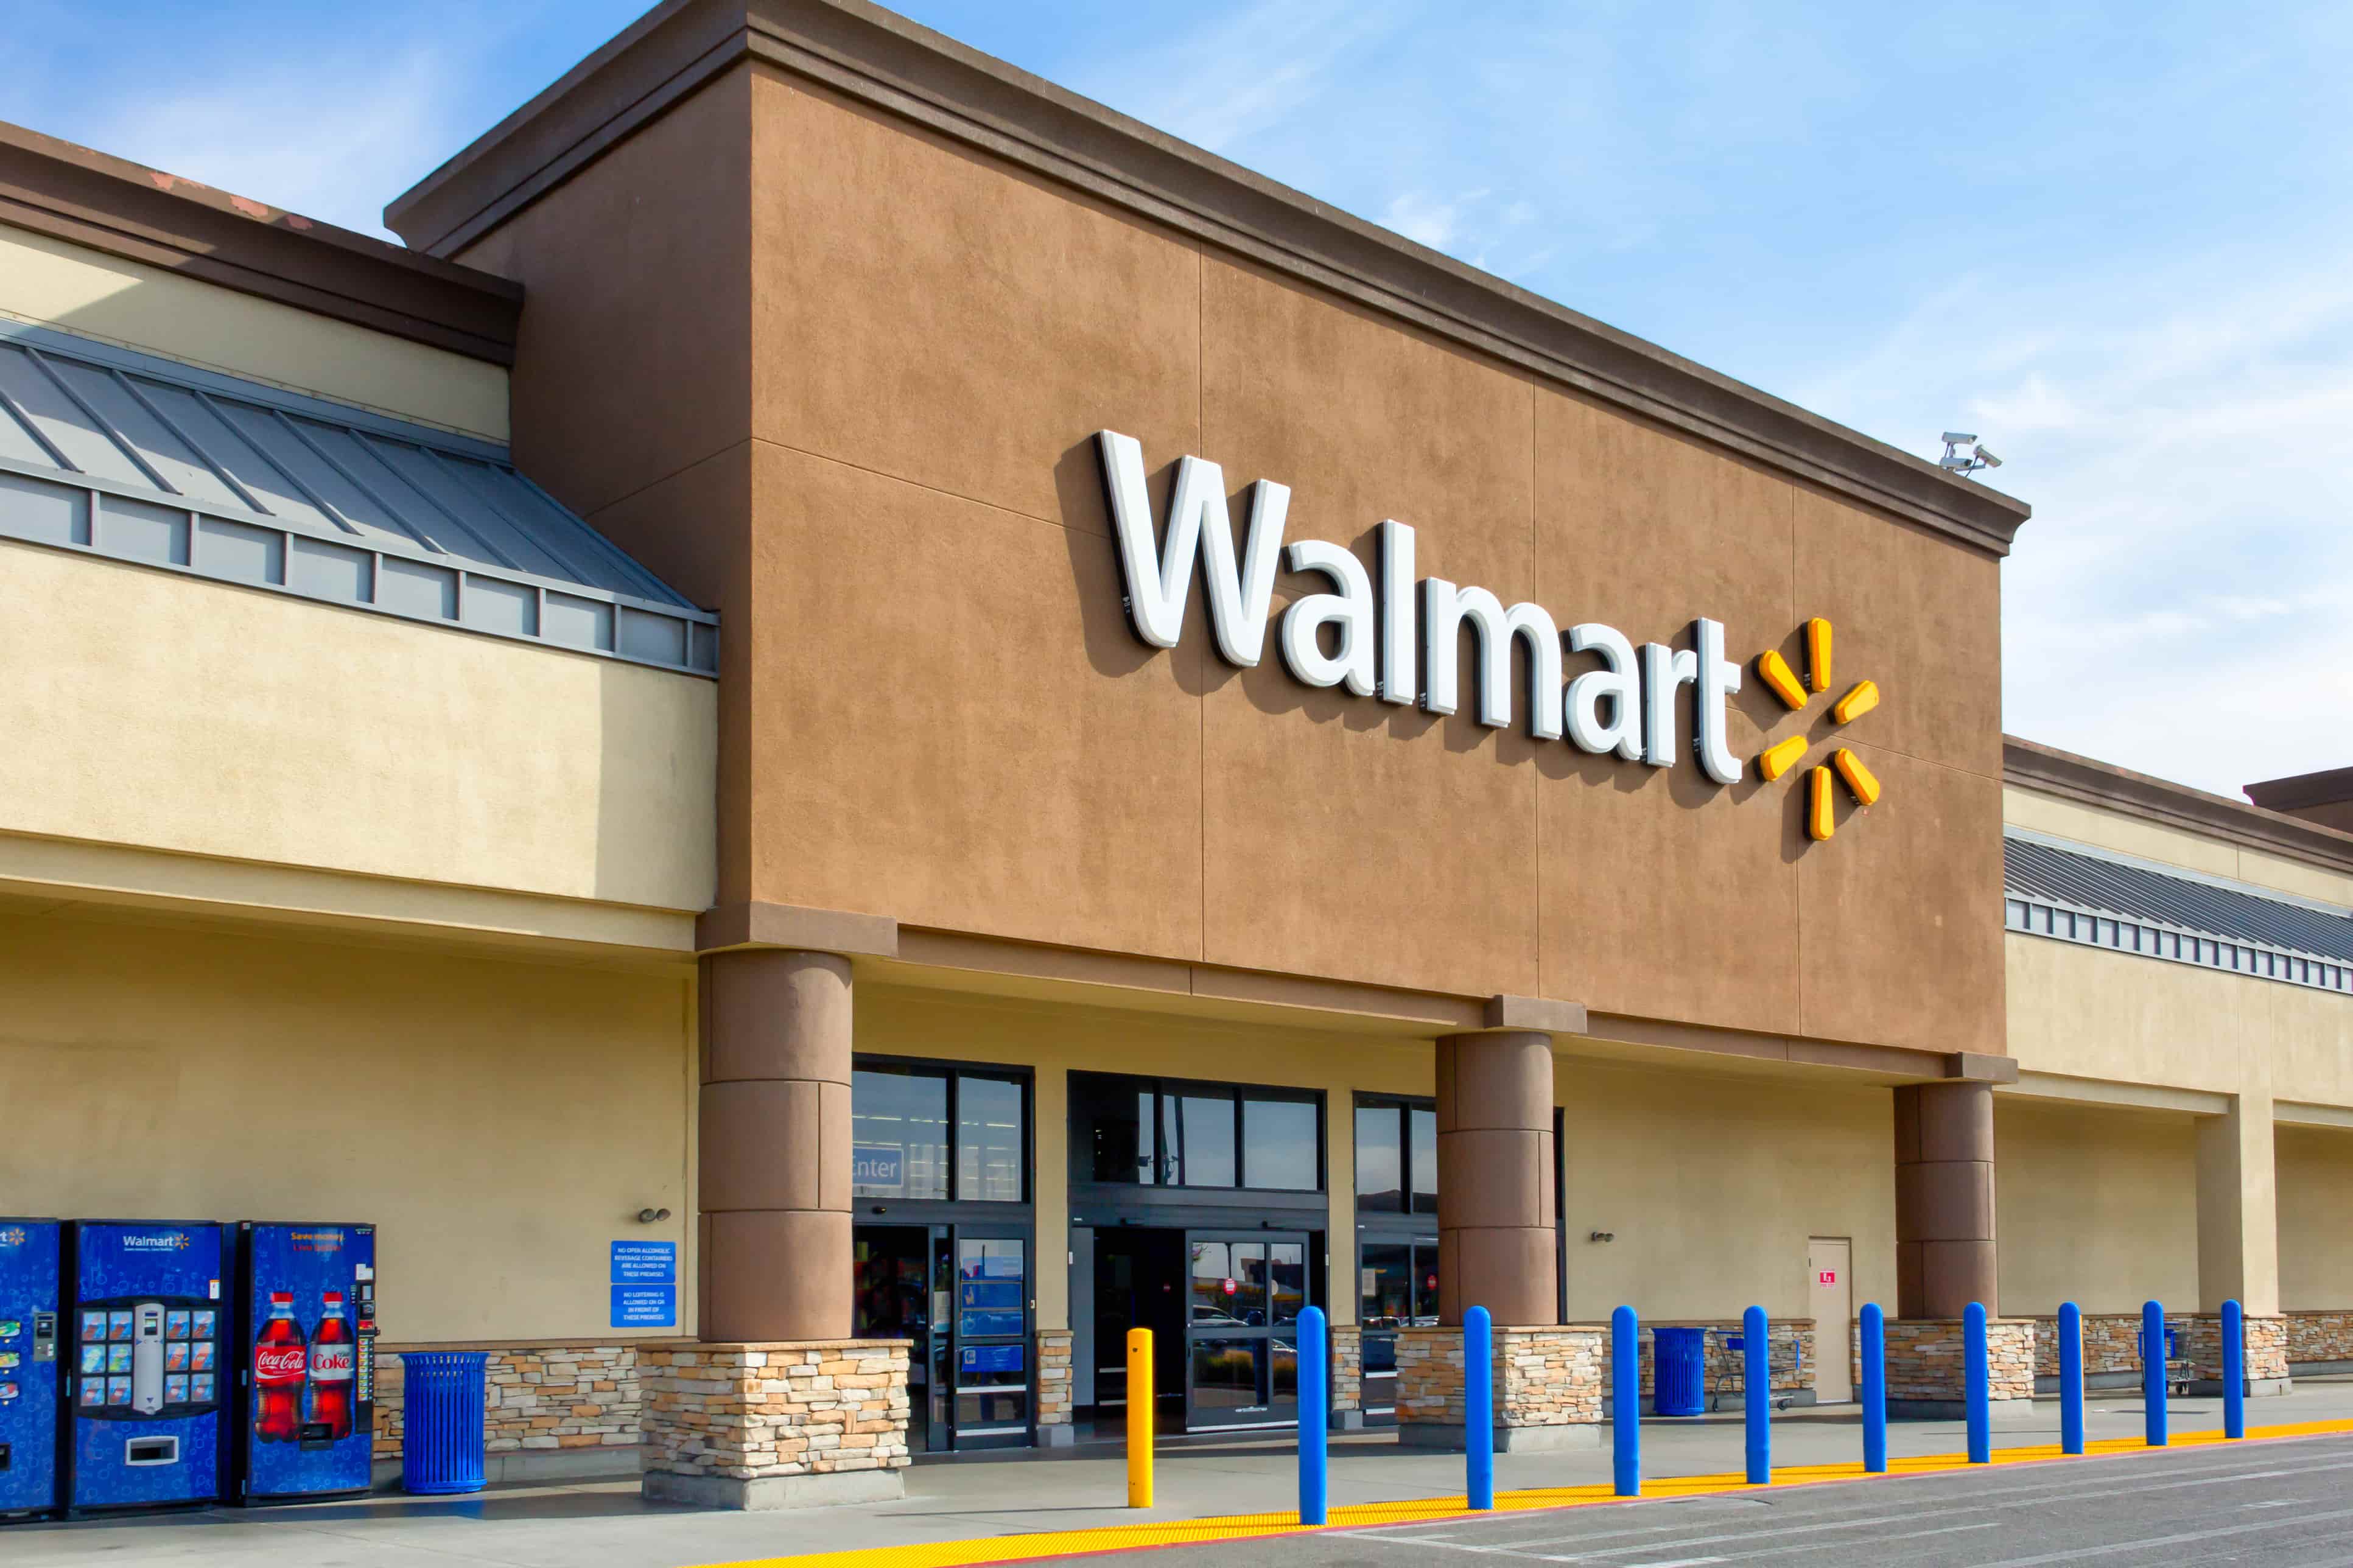 5 Best Steps for How to Sell Your Product to Walmart?